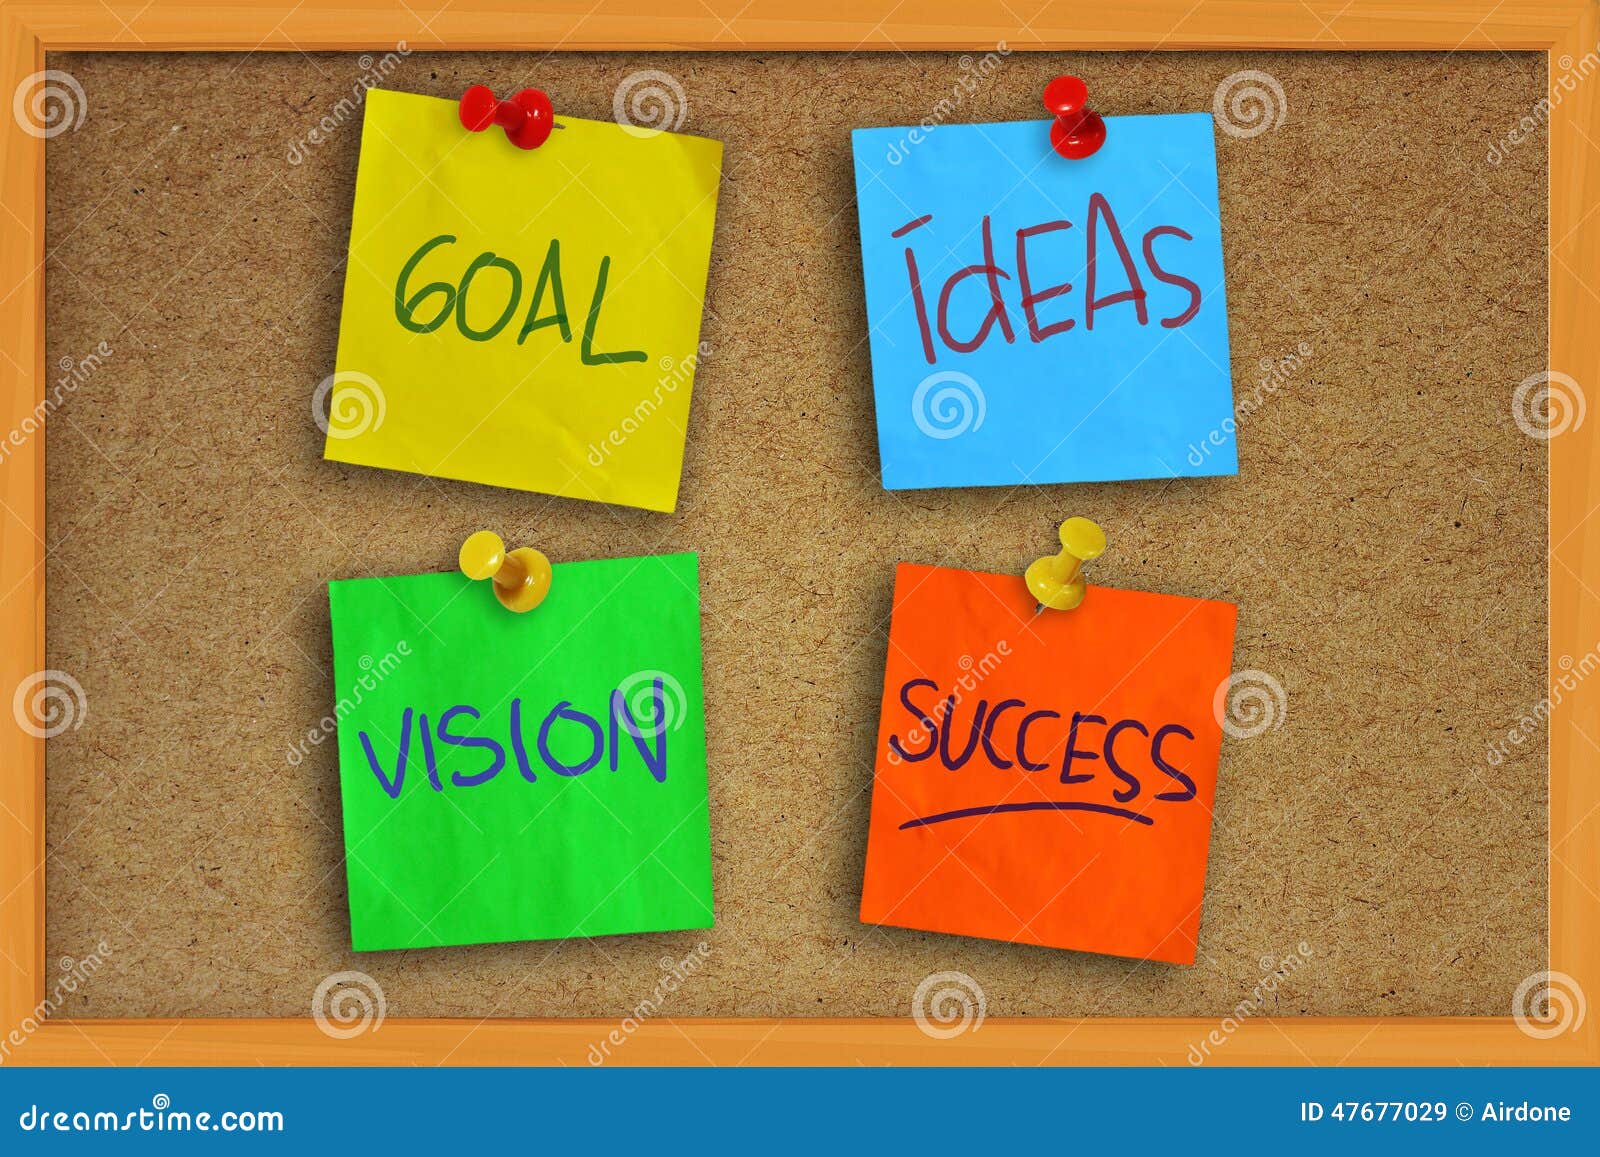 4 630 Goal Vision Board Photos Free Royalty Free Stock Photos From Dreamstime